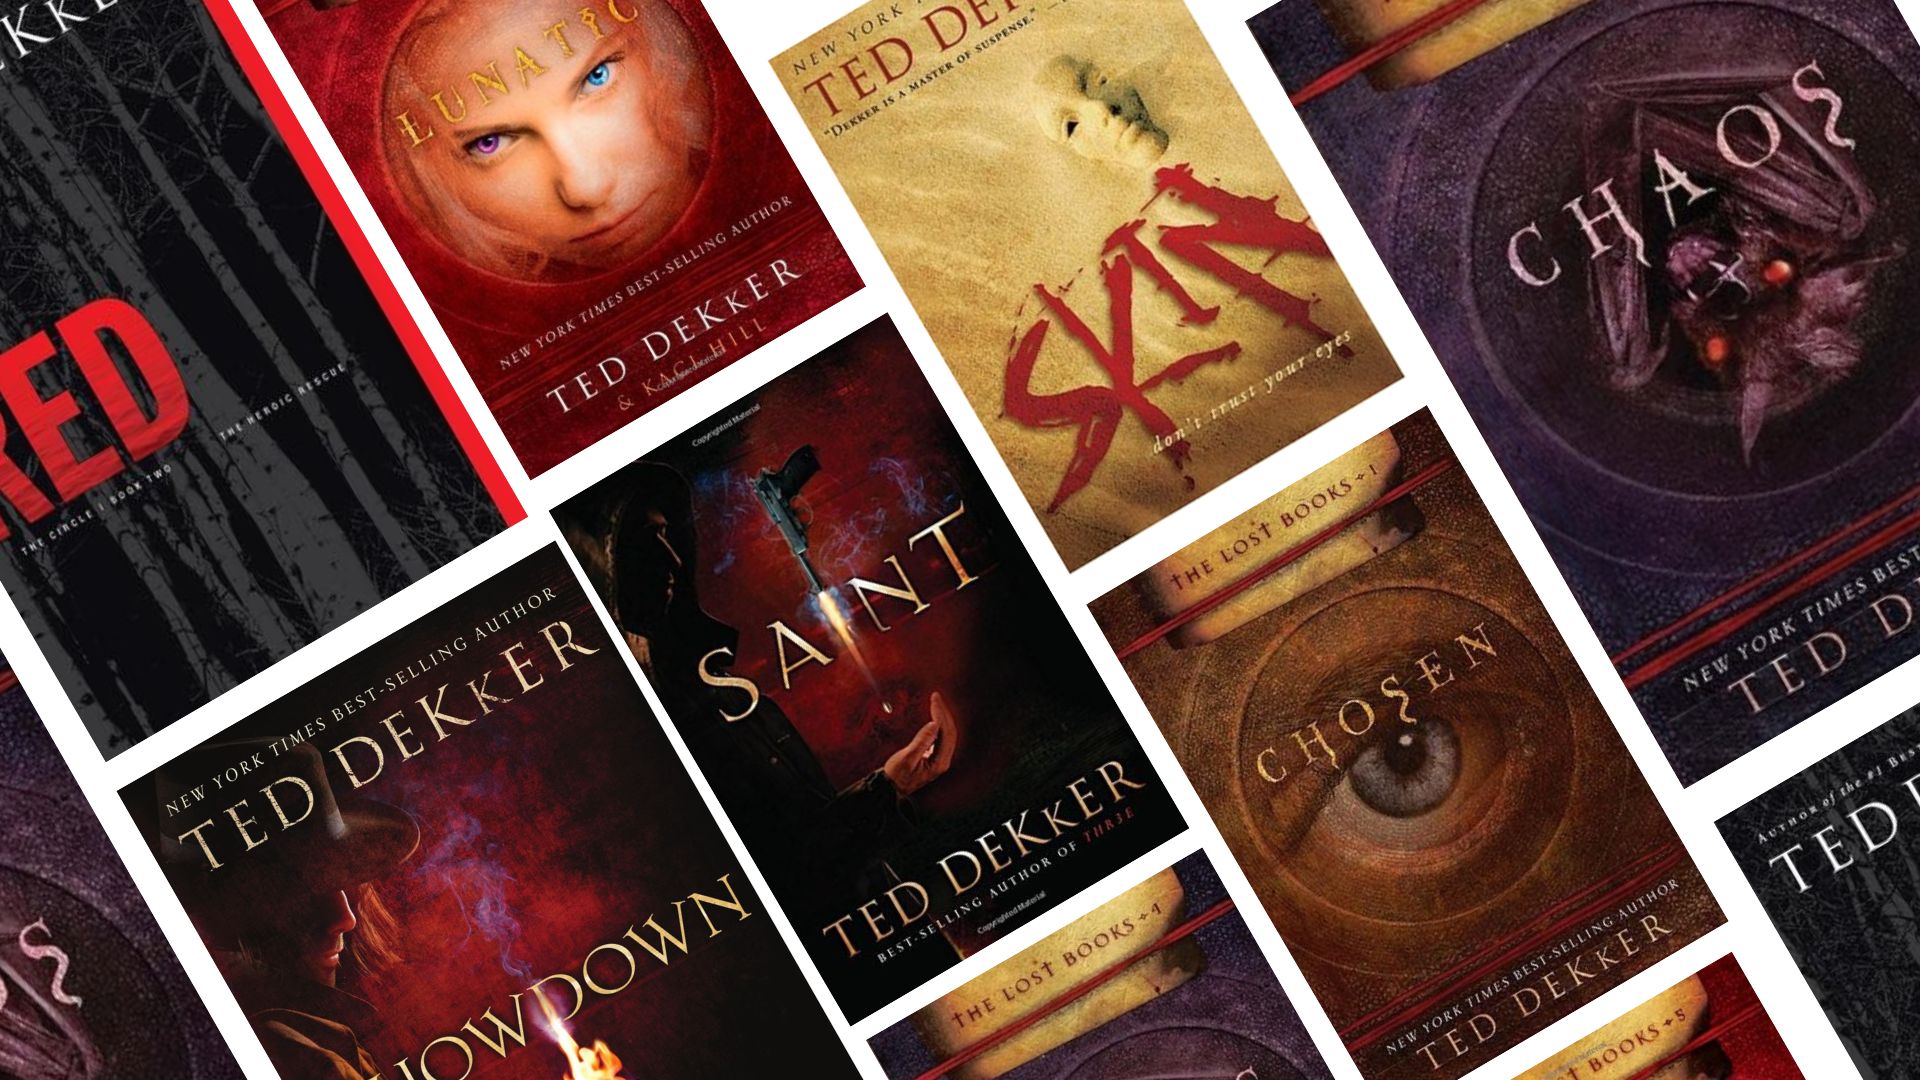 How To Read Ted Dekker Books In Order